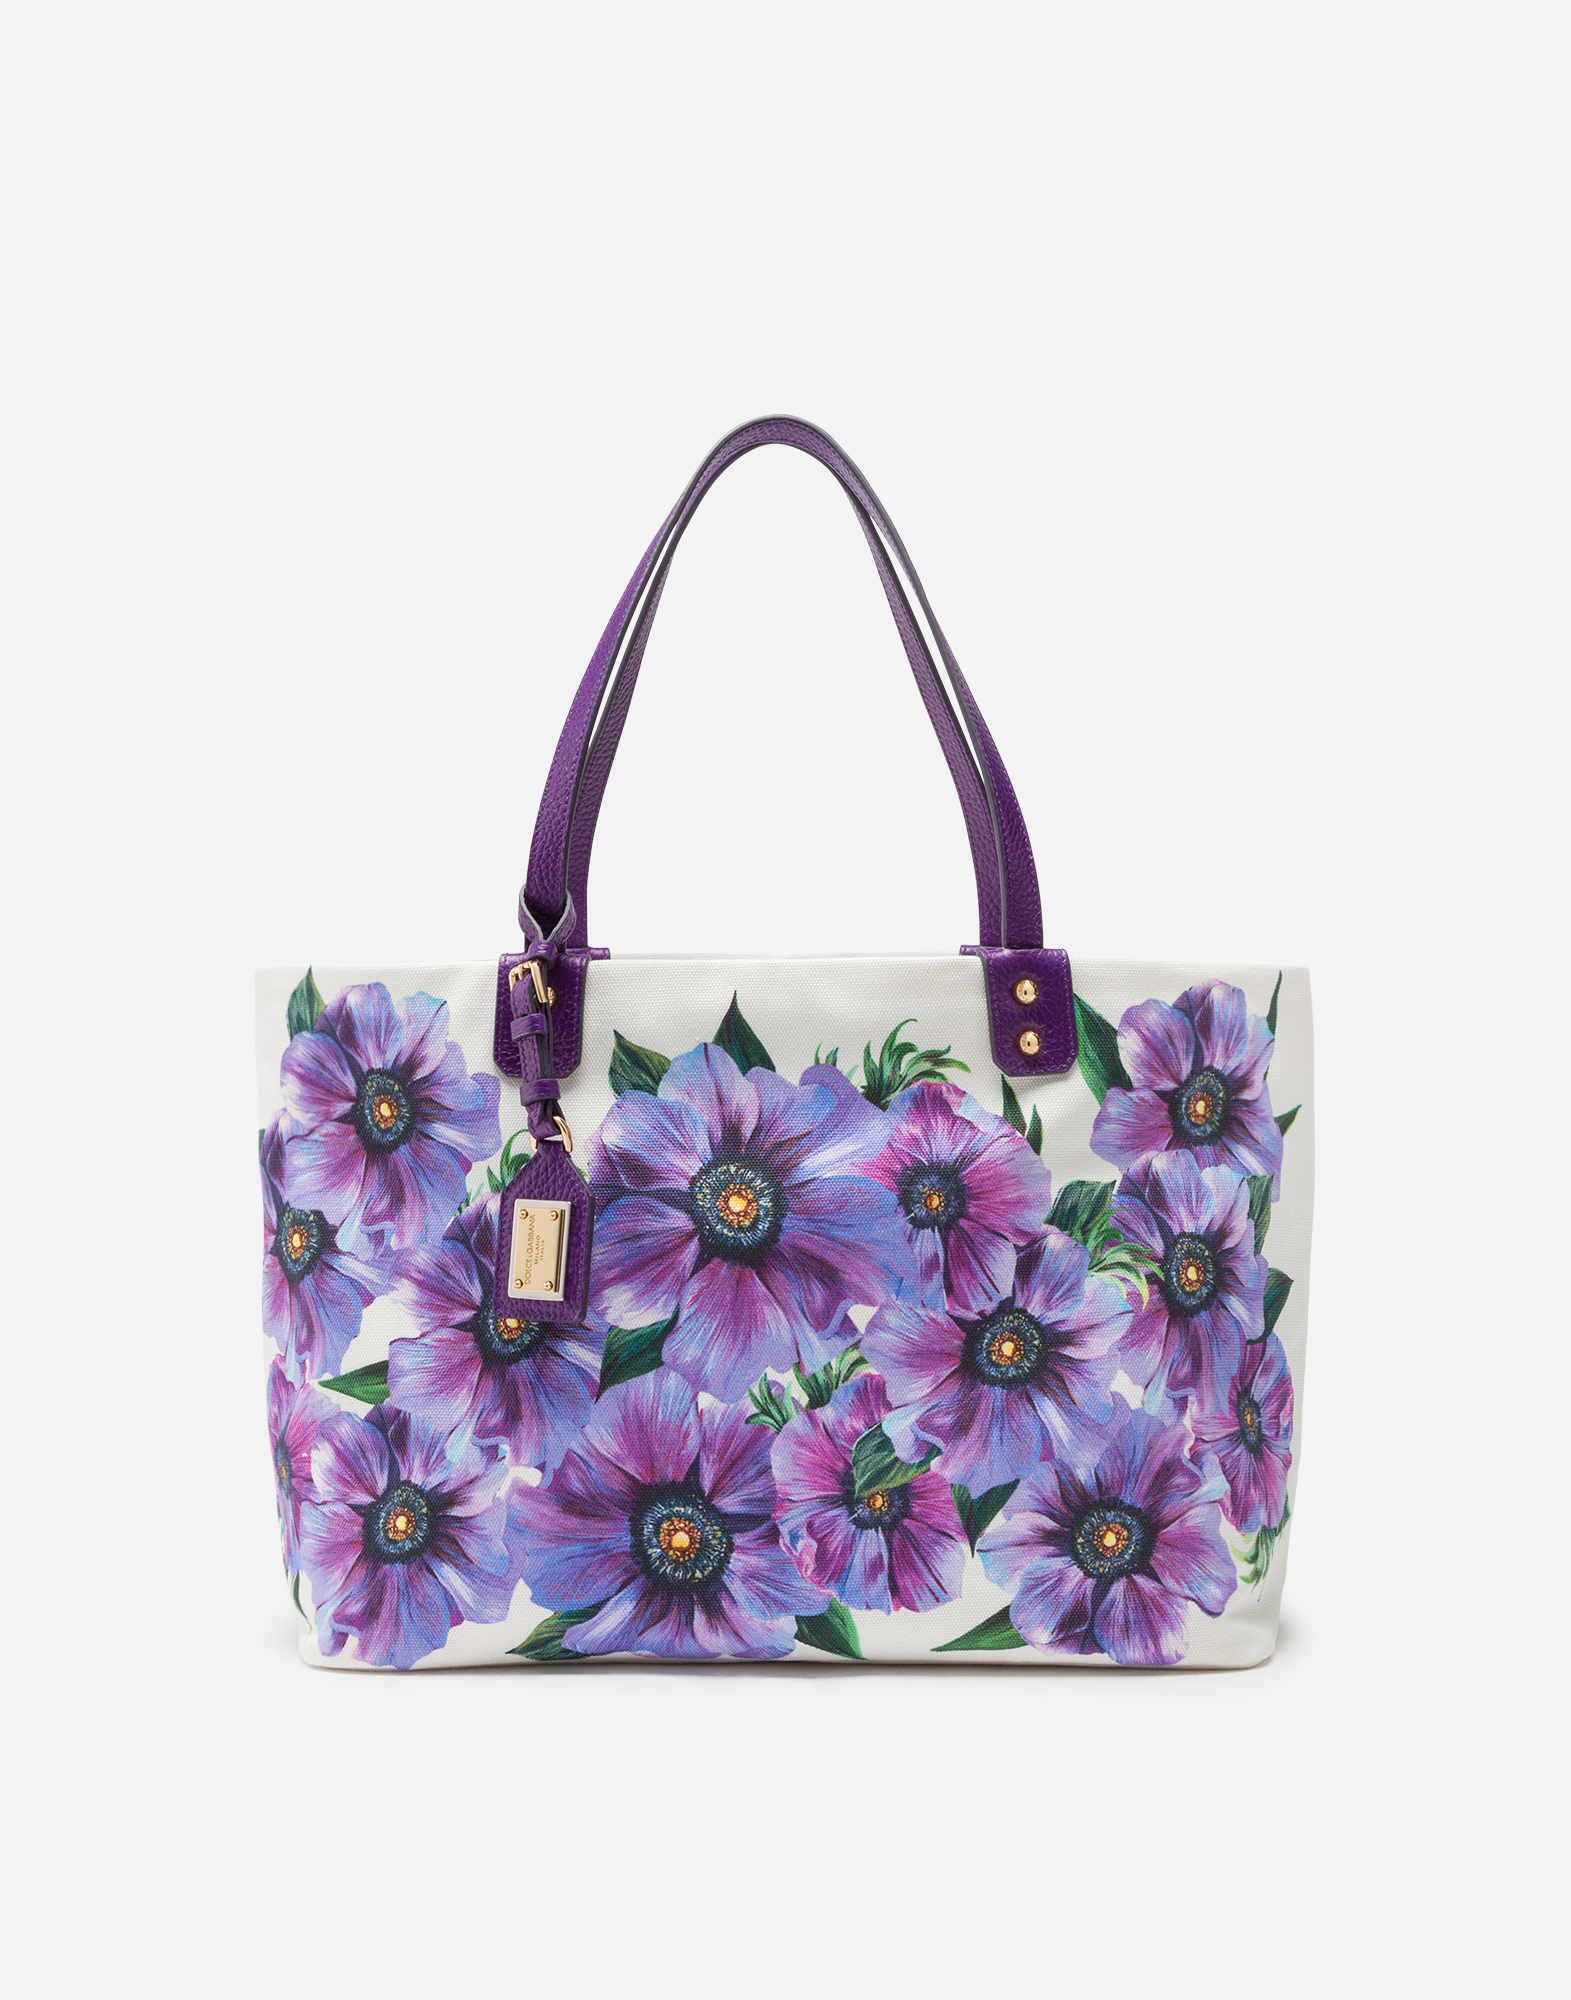 DOLCE & GABBANA MEDIUM BEATRICE SHOPPING BAG IN CANVAS WITH ANEMONE PRINT